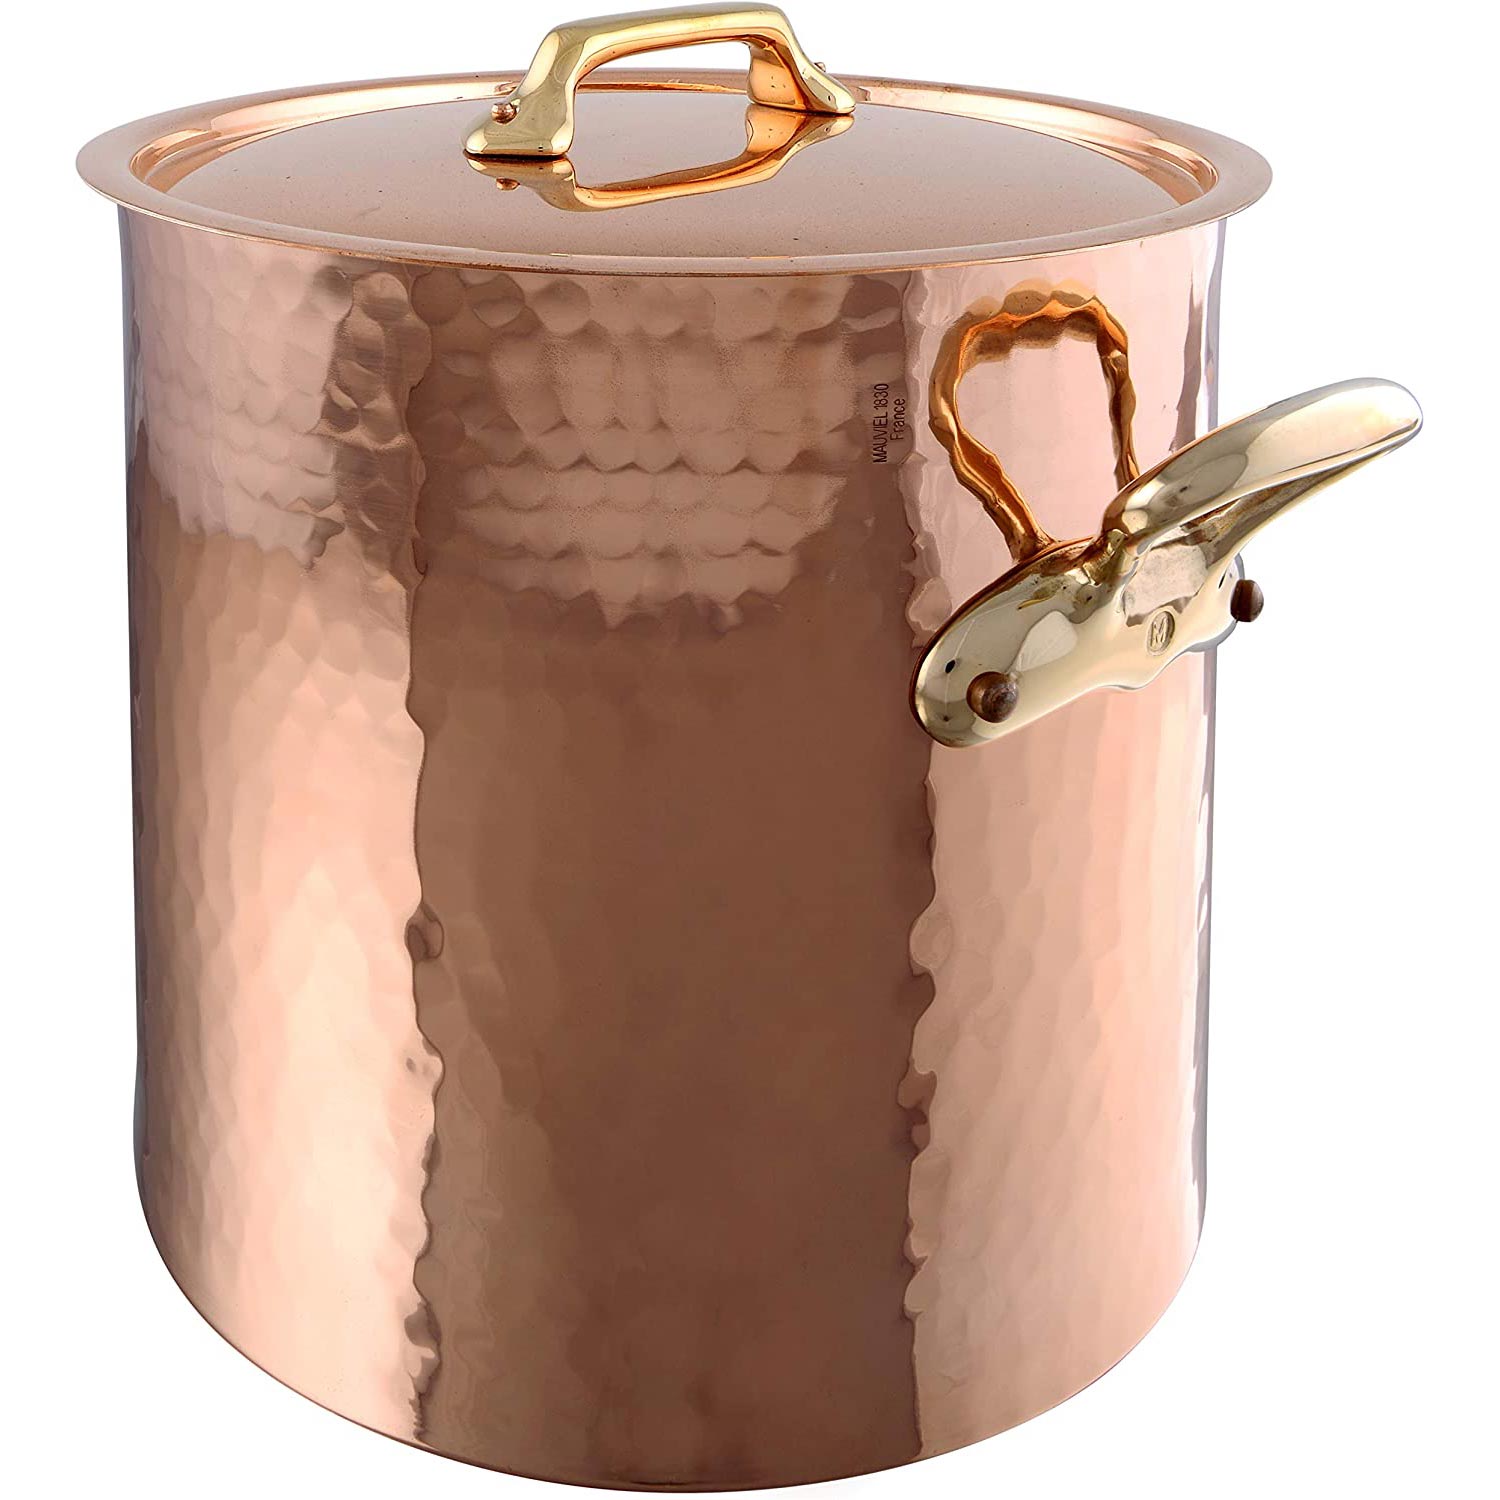 Mauviel M'Tradition 2148.32 26.6 Quart Hammered Copper Stockpot with Lid (Bronze Handles) - IN STOCK IN USA!!!!!